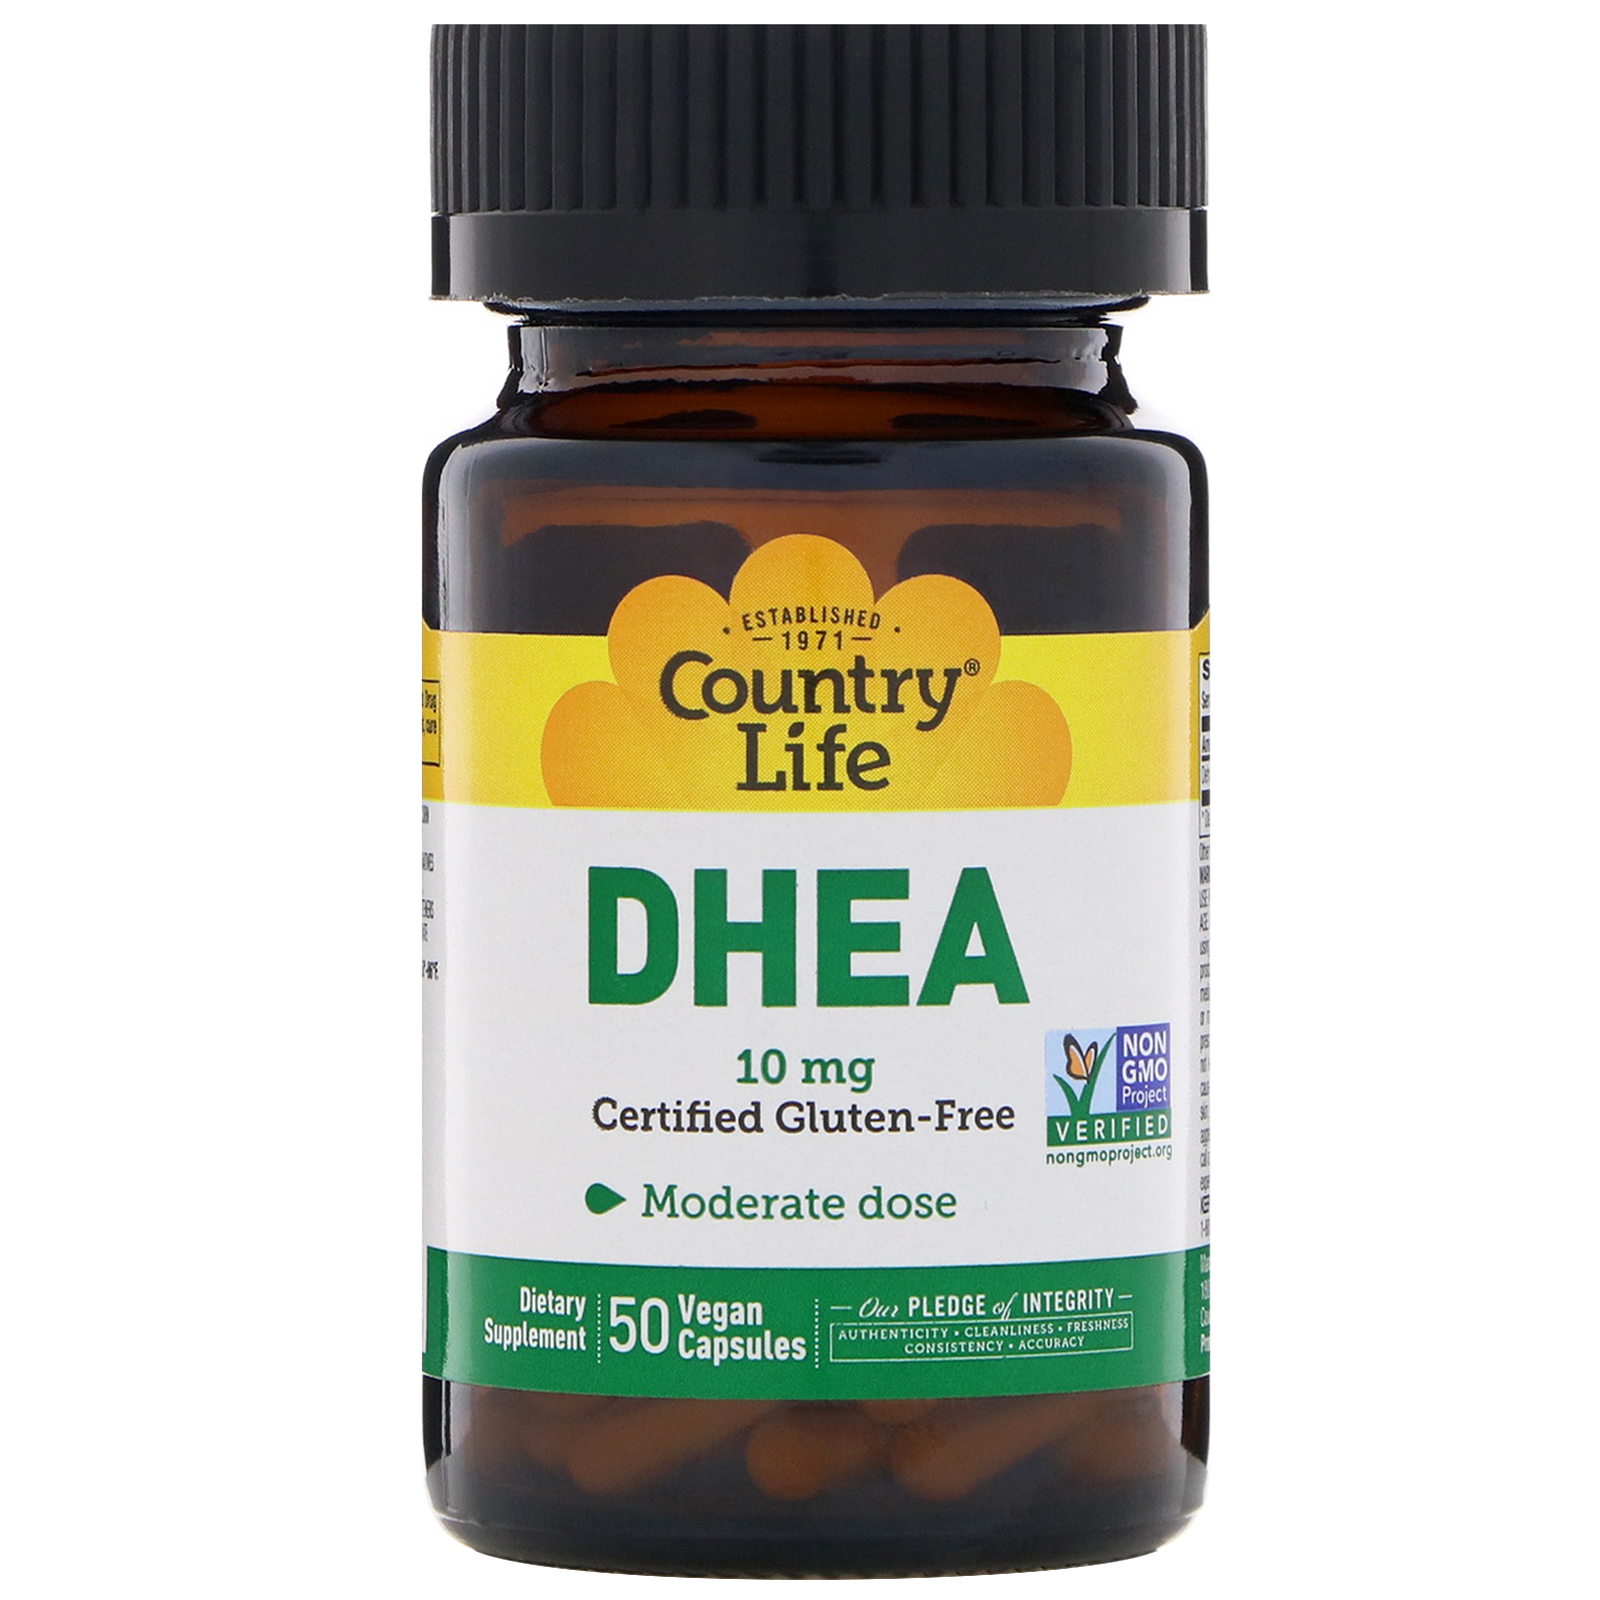 Country life 4. DHEA 10 мг. ДГЭА 50 мг. DHEA 50 препарат. Country Life DHEA 10 MG.